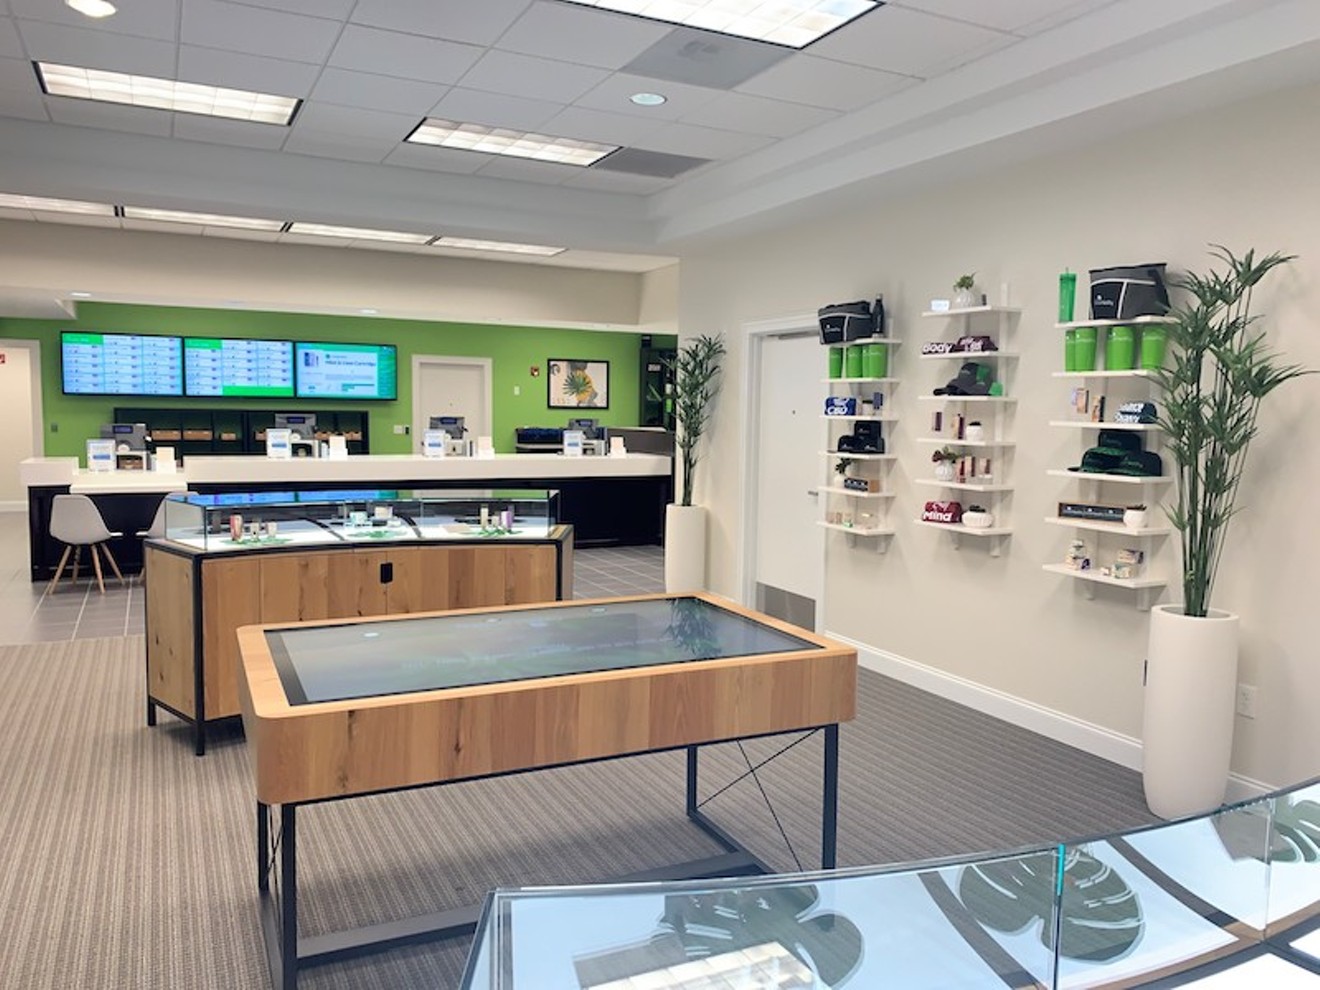 GrowHealthy Lake Worth opens Friday, March 8, with 17 additional Florida dispensaries slated for 2019.